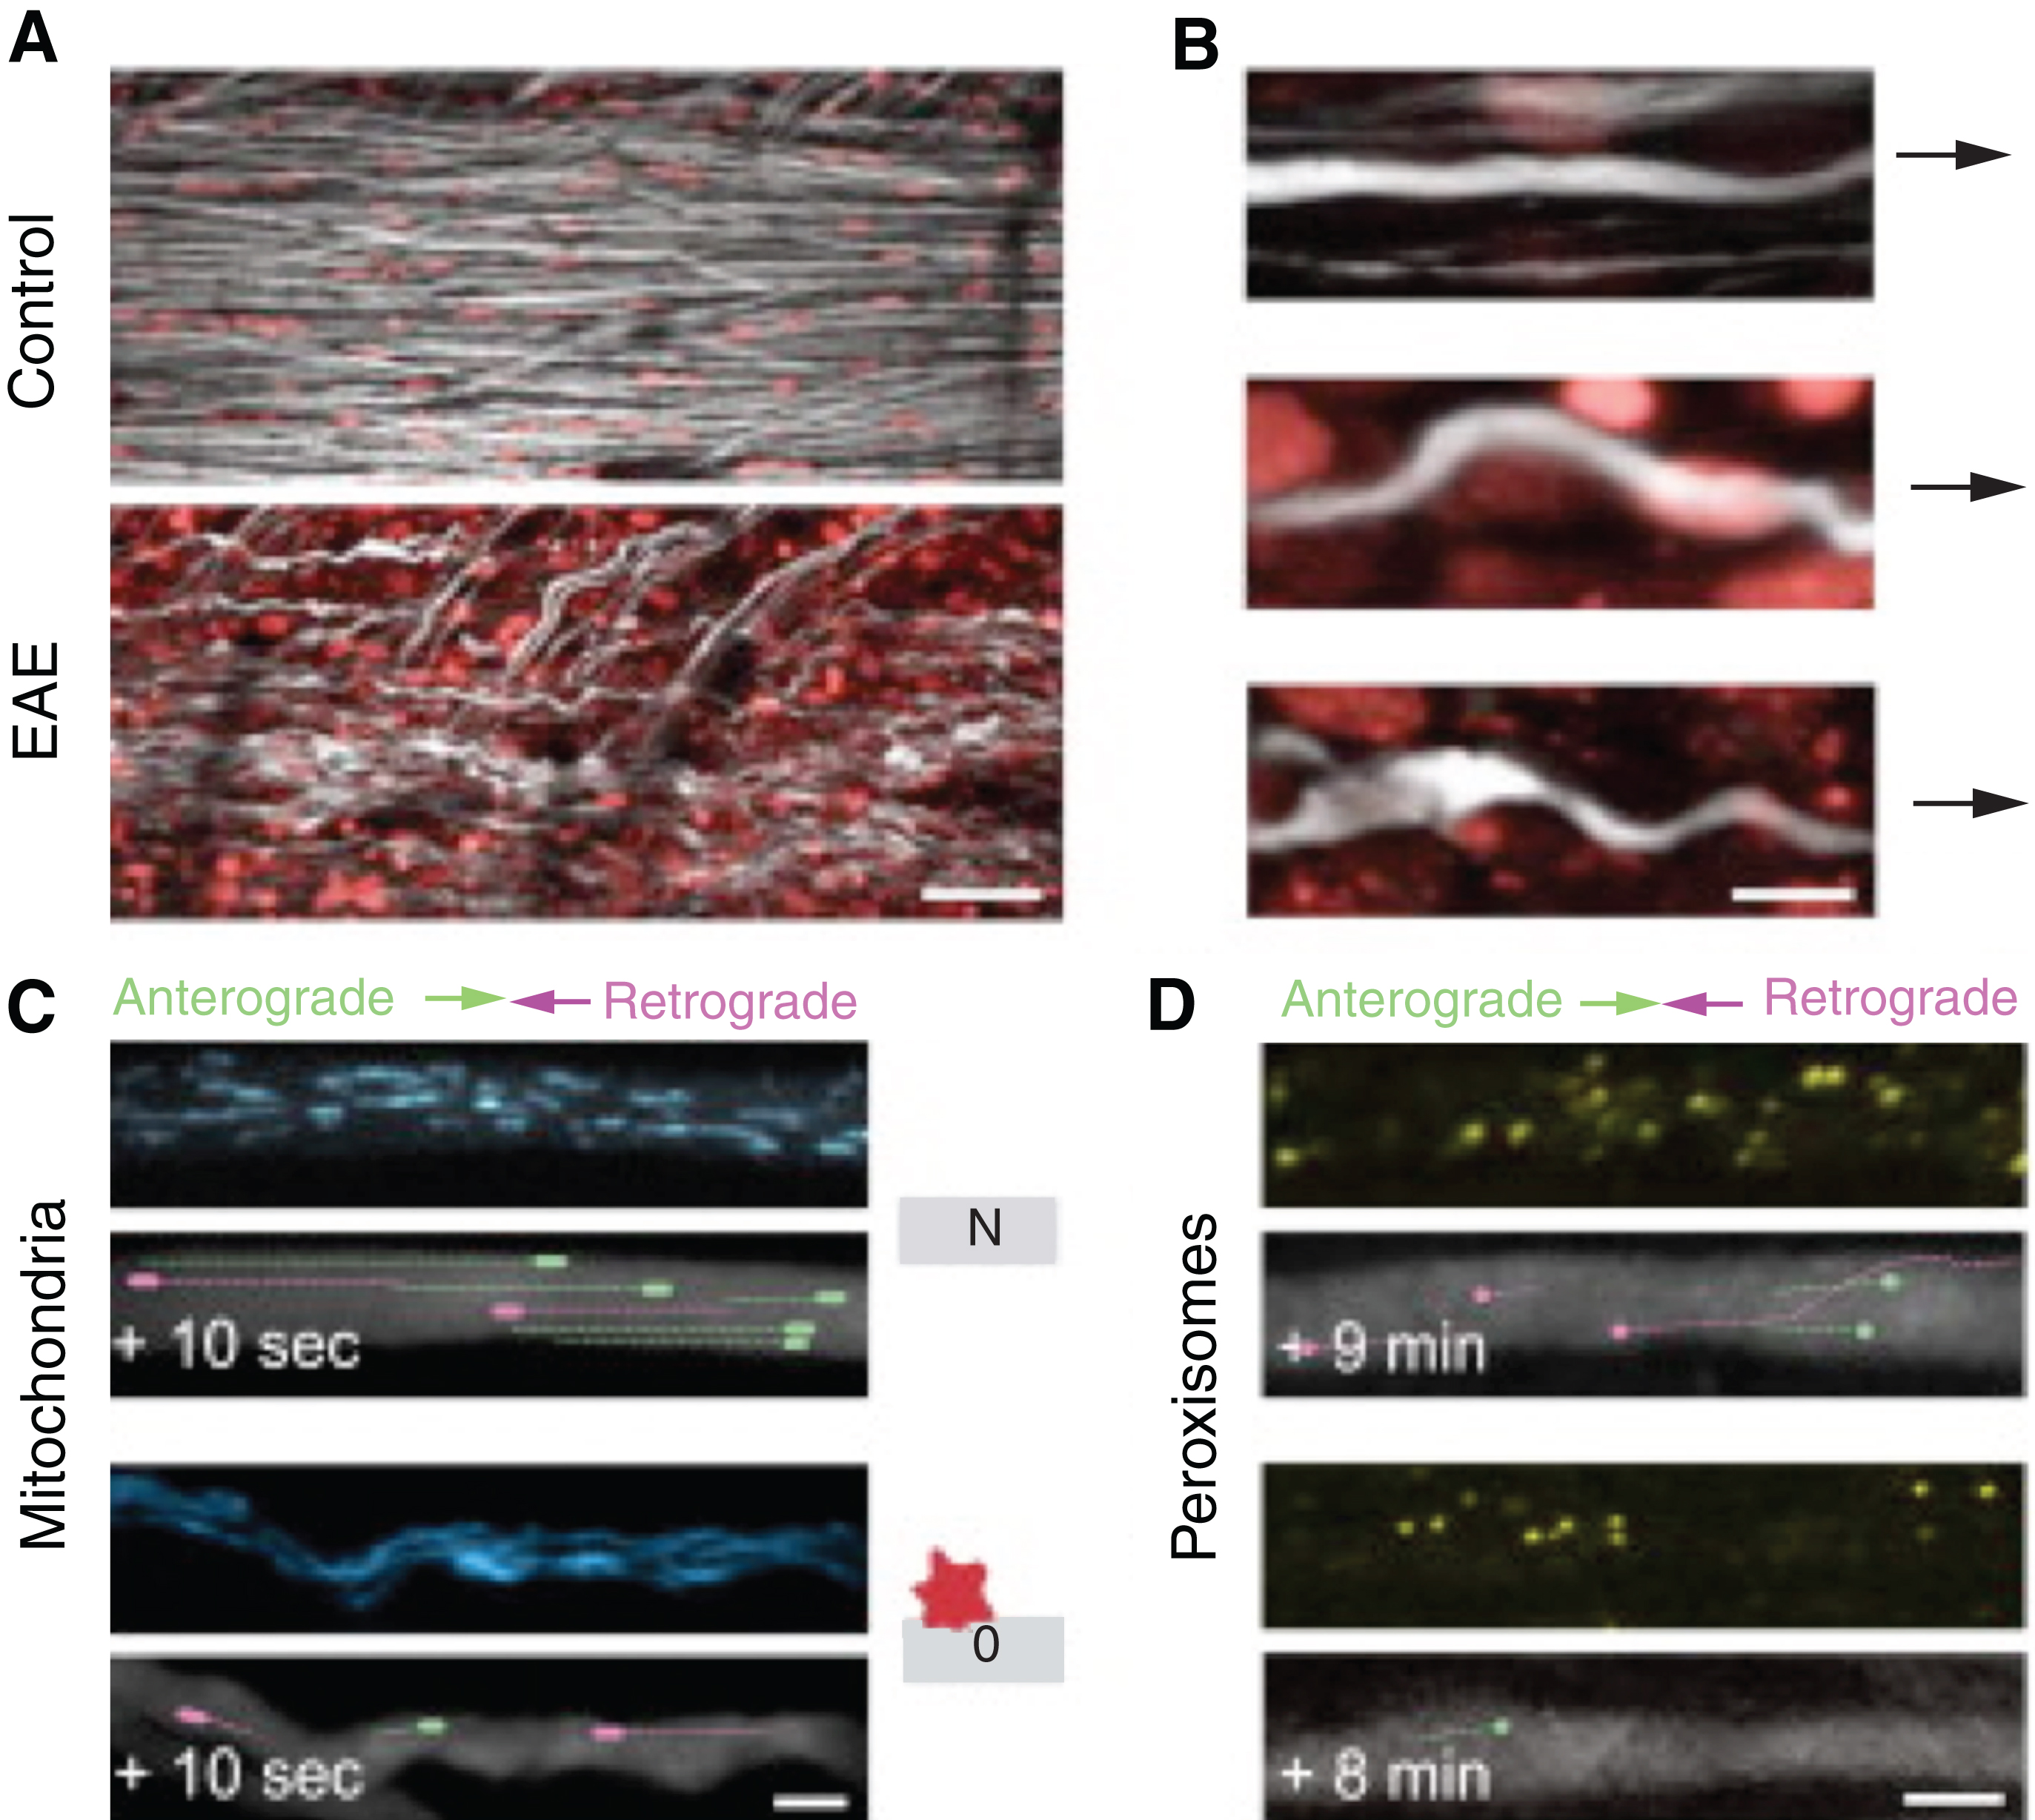 In vivo of Organelle Transport in neuroinflammatory lesions (A) In vivo two-photon image of the spinal cord of a control Thy1 -YFP-16 × Thy1-MitoCFP-P mouse (top) and a Thy1-YFP-16 × Thy1-MitoCFP-P mouse 2 days after onset of EAE (bottom; axons, white; nuclei labeled by in vivo application of Nuclear-ID Red, red; mitochondrial channel not shown). (B) Magnified views of axons from neuroinflammatory lesions illustrating different stages of axon morphology (N, axon from a control mouse; normal-appearing axon within an inflammatory lesion and swollen axon within an inflammatory lesion. (C and D) In vivo two-photon time-series images of control axons (top) and stage 0 axons imaged 2 days after onset of EAE (bottom) with moving mitochondria (C), in Thy1-YFP-16 × Thy1-MitoCFP-P mice, and peroxisomes (D), in Thy1-OFP-3 × Thy1-PeroxiYFP-376 mice, represented as pseudo-colored overlays (lines represent tracks during the indicated time period). Note that anterograde transport is more significantly affected than retrograde transport (adapted with requested permission from Ref. 58).